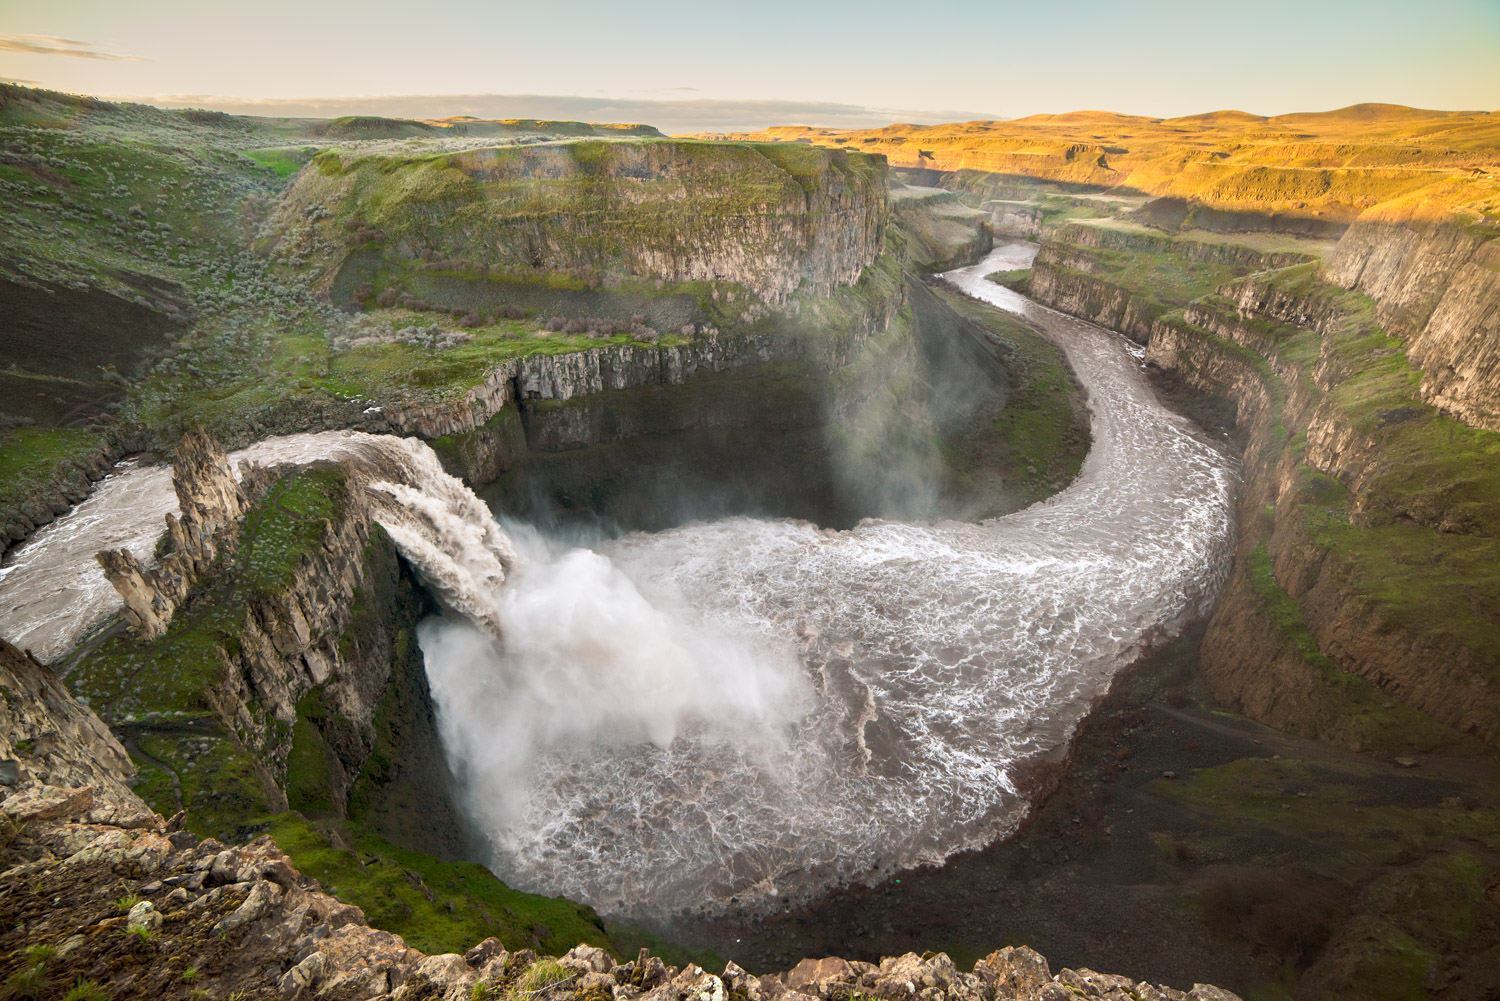 Huge flows of water flow over Palouse Falls in eastern Washington with a view of the Palouse River.